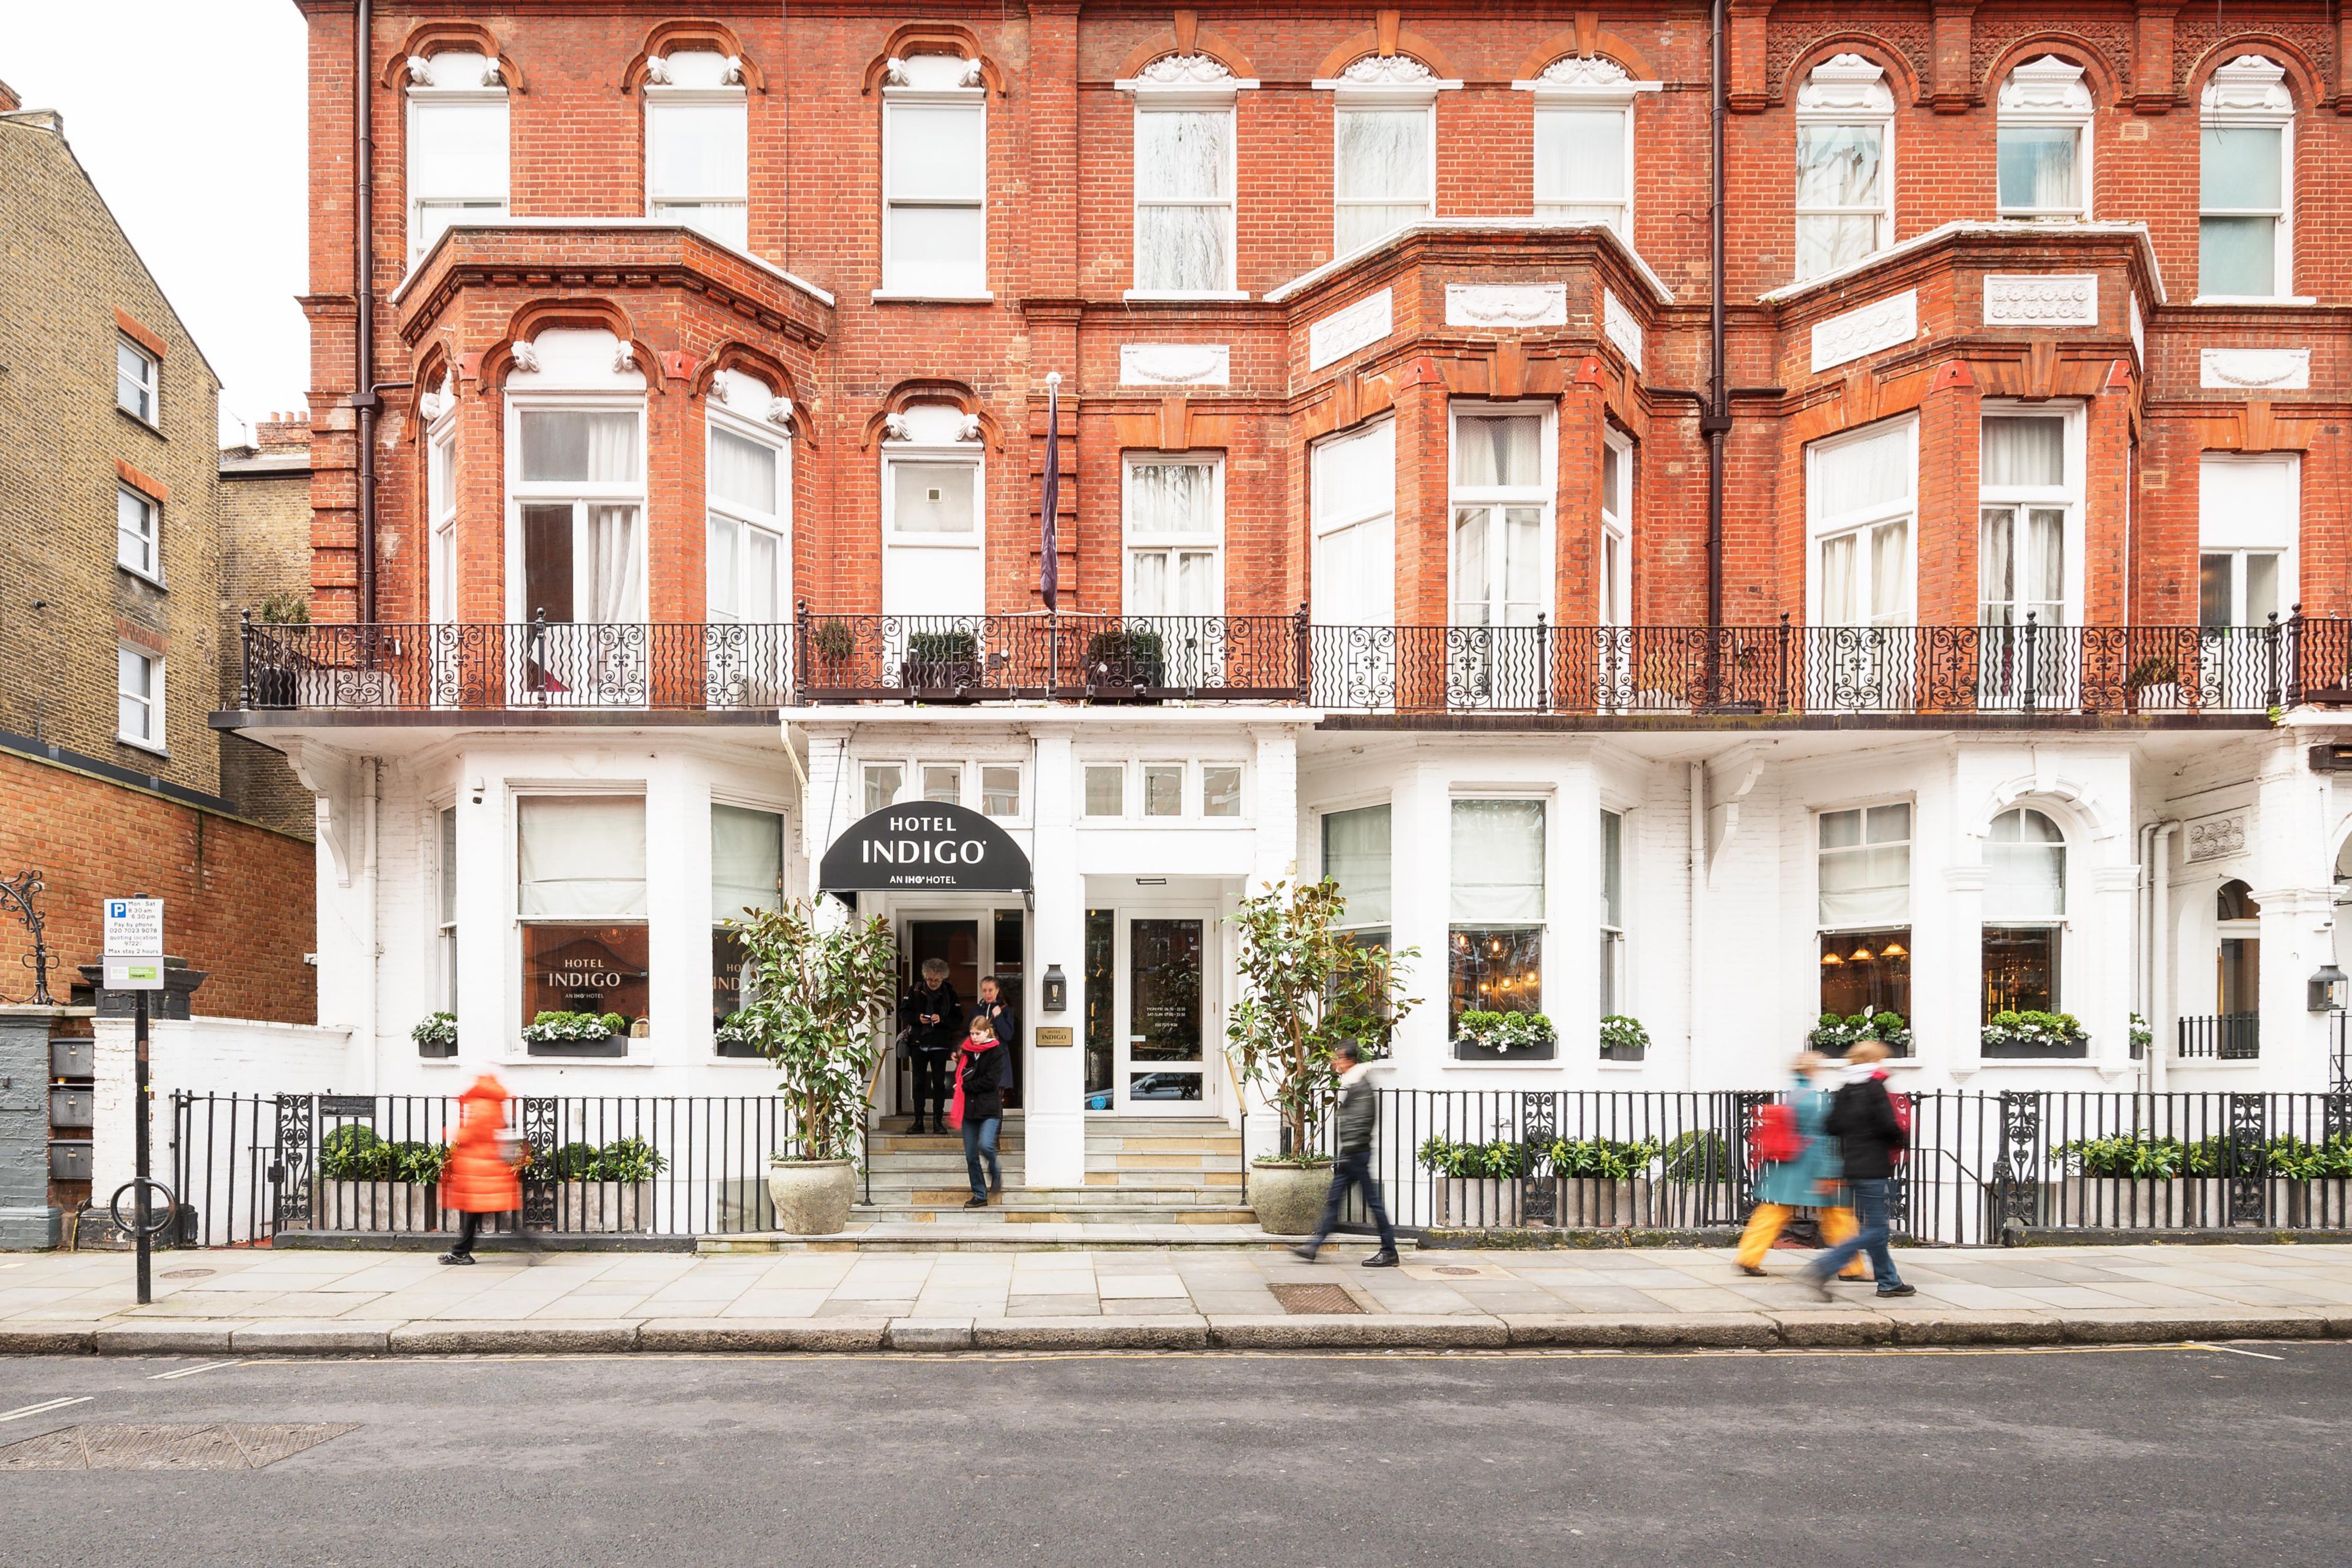 Proud to announce that Hotel Indigo London - Kensington has achieved Bronze Green Tourism! 

Accreditation, recognition our commitment to sustainability and responsible tourism. This accolade is a testament to our dedication and a step towards a greener future.